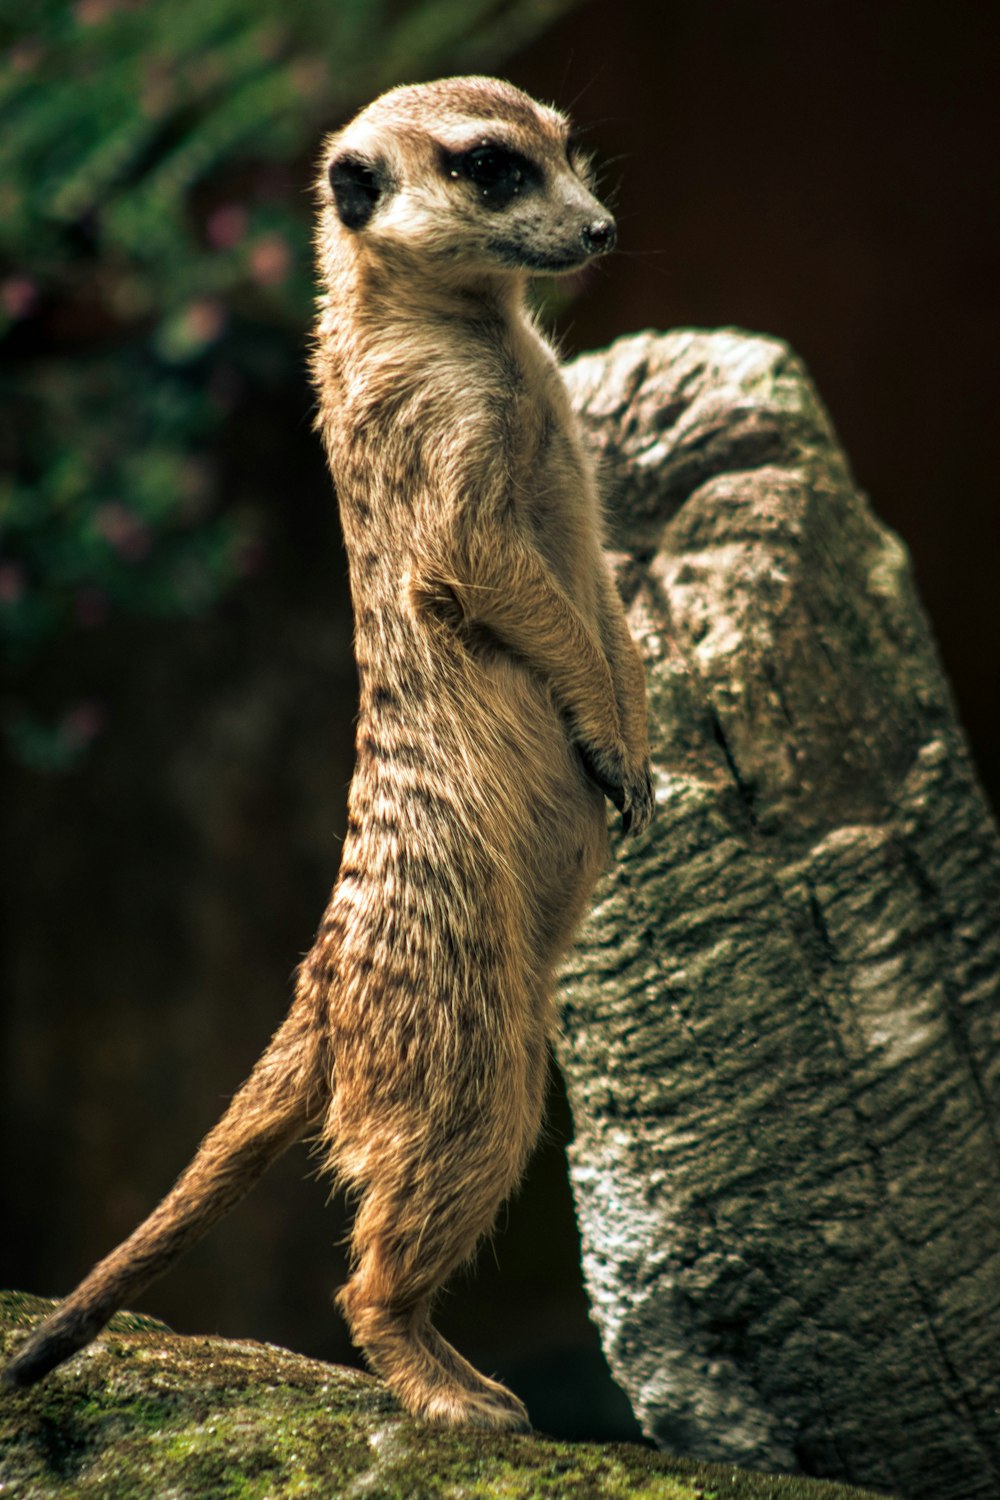 a meerkat standing on its hind legs on a rock